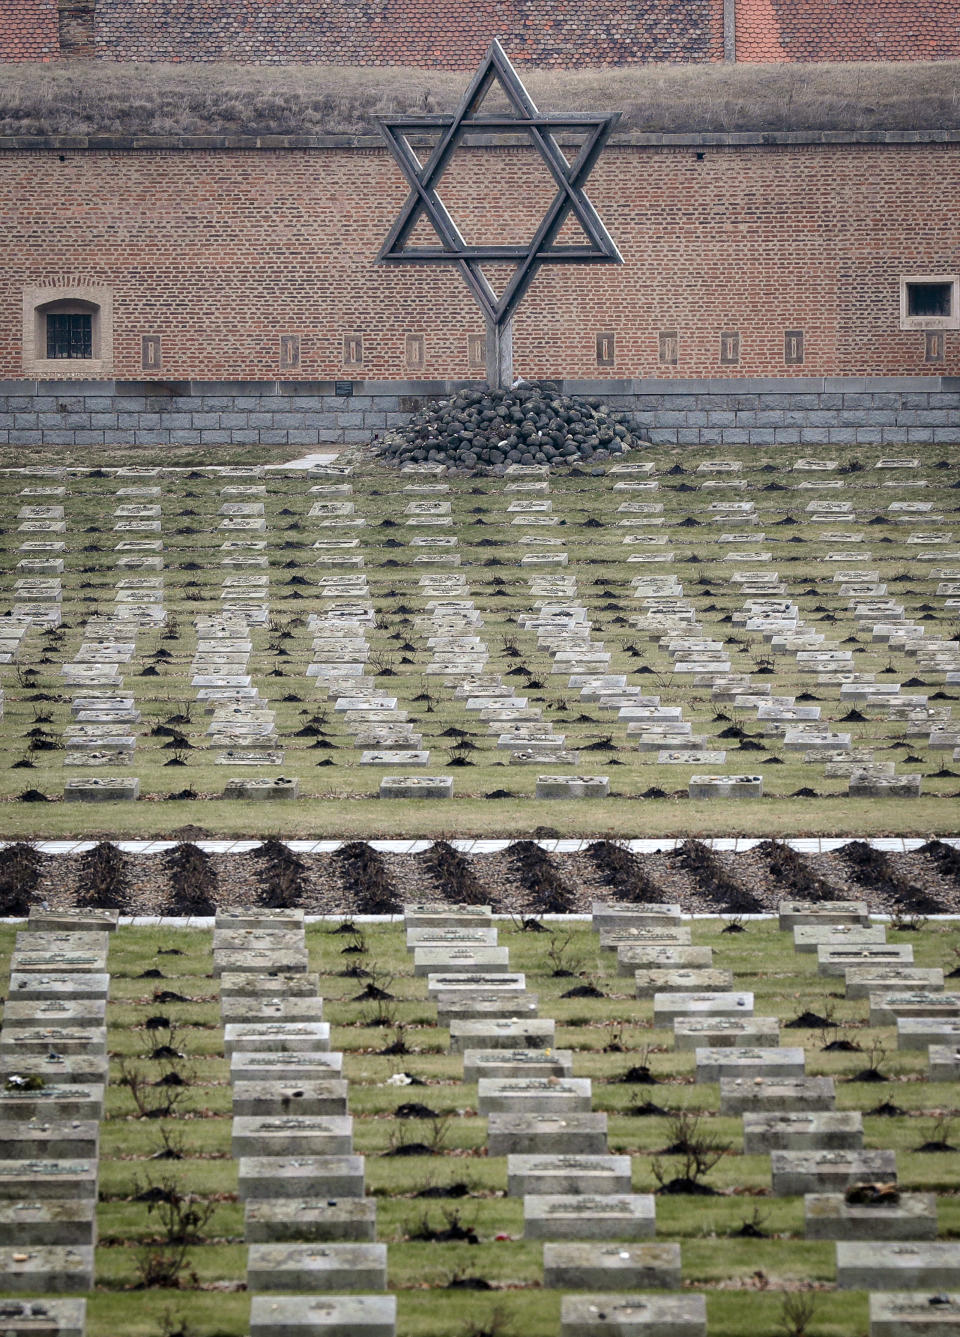 The cemetery of the former Nazi concentration camp in Terezin, Czech Republic, Thursday, Jan. 24, 2019. A unique collection of some 4,500 drawings by children who were interned at the Theresienstadt concentration camp during the Holocaust now displayed in the Pinkas Synagogue, still attracts attention even after 75 years since their creation. The drawings depict the everyday life as well hopes and dreams of returning home. (AP Photo/Petr David Josek)